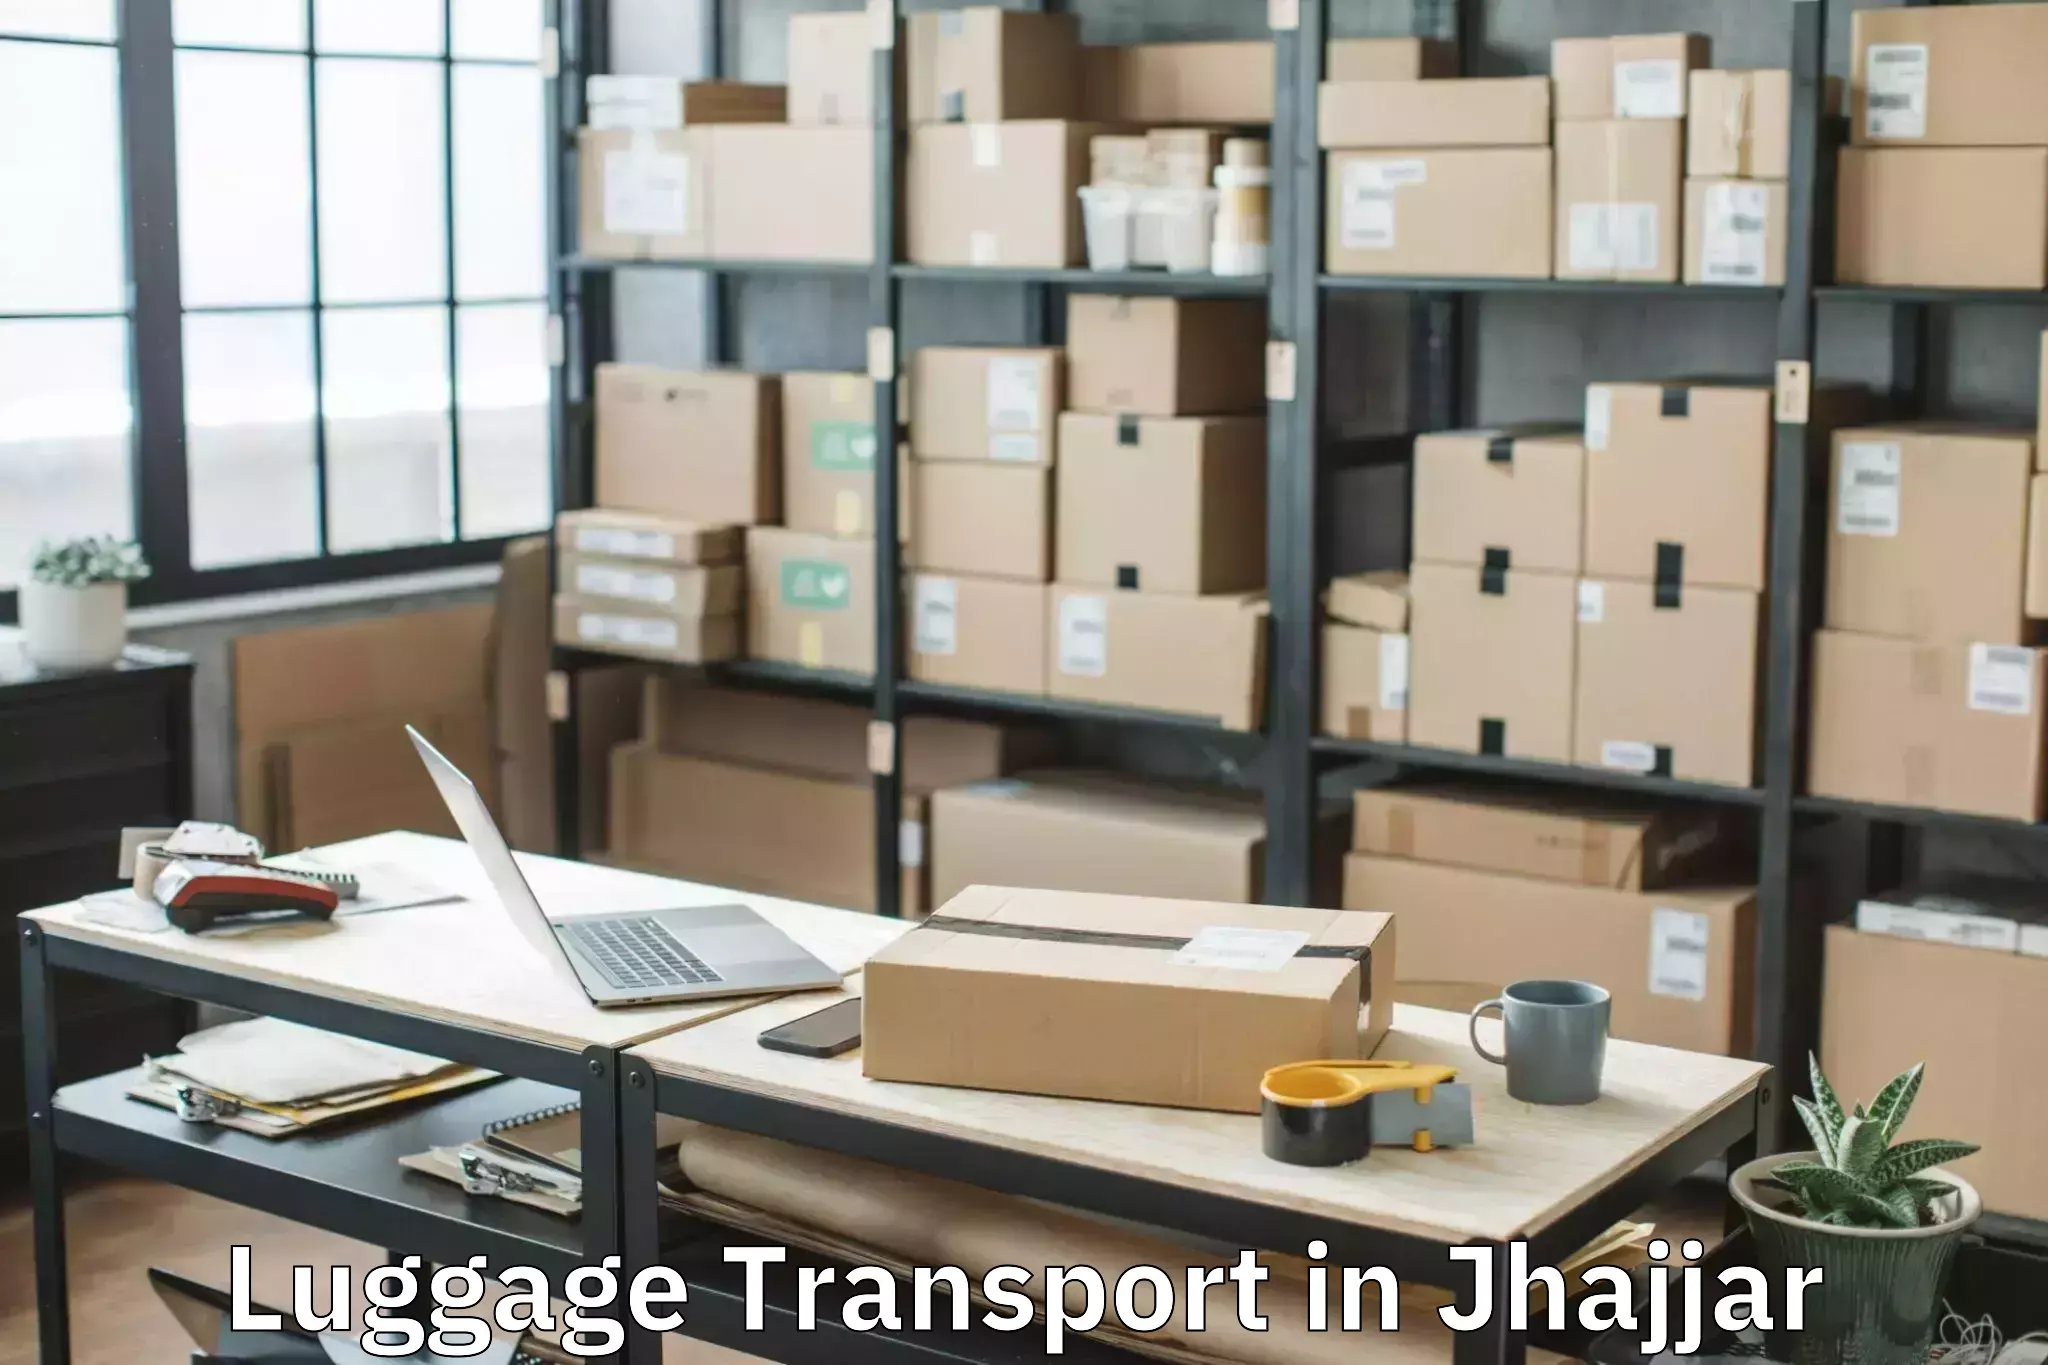 Luggage transport solutions in Jhajjar